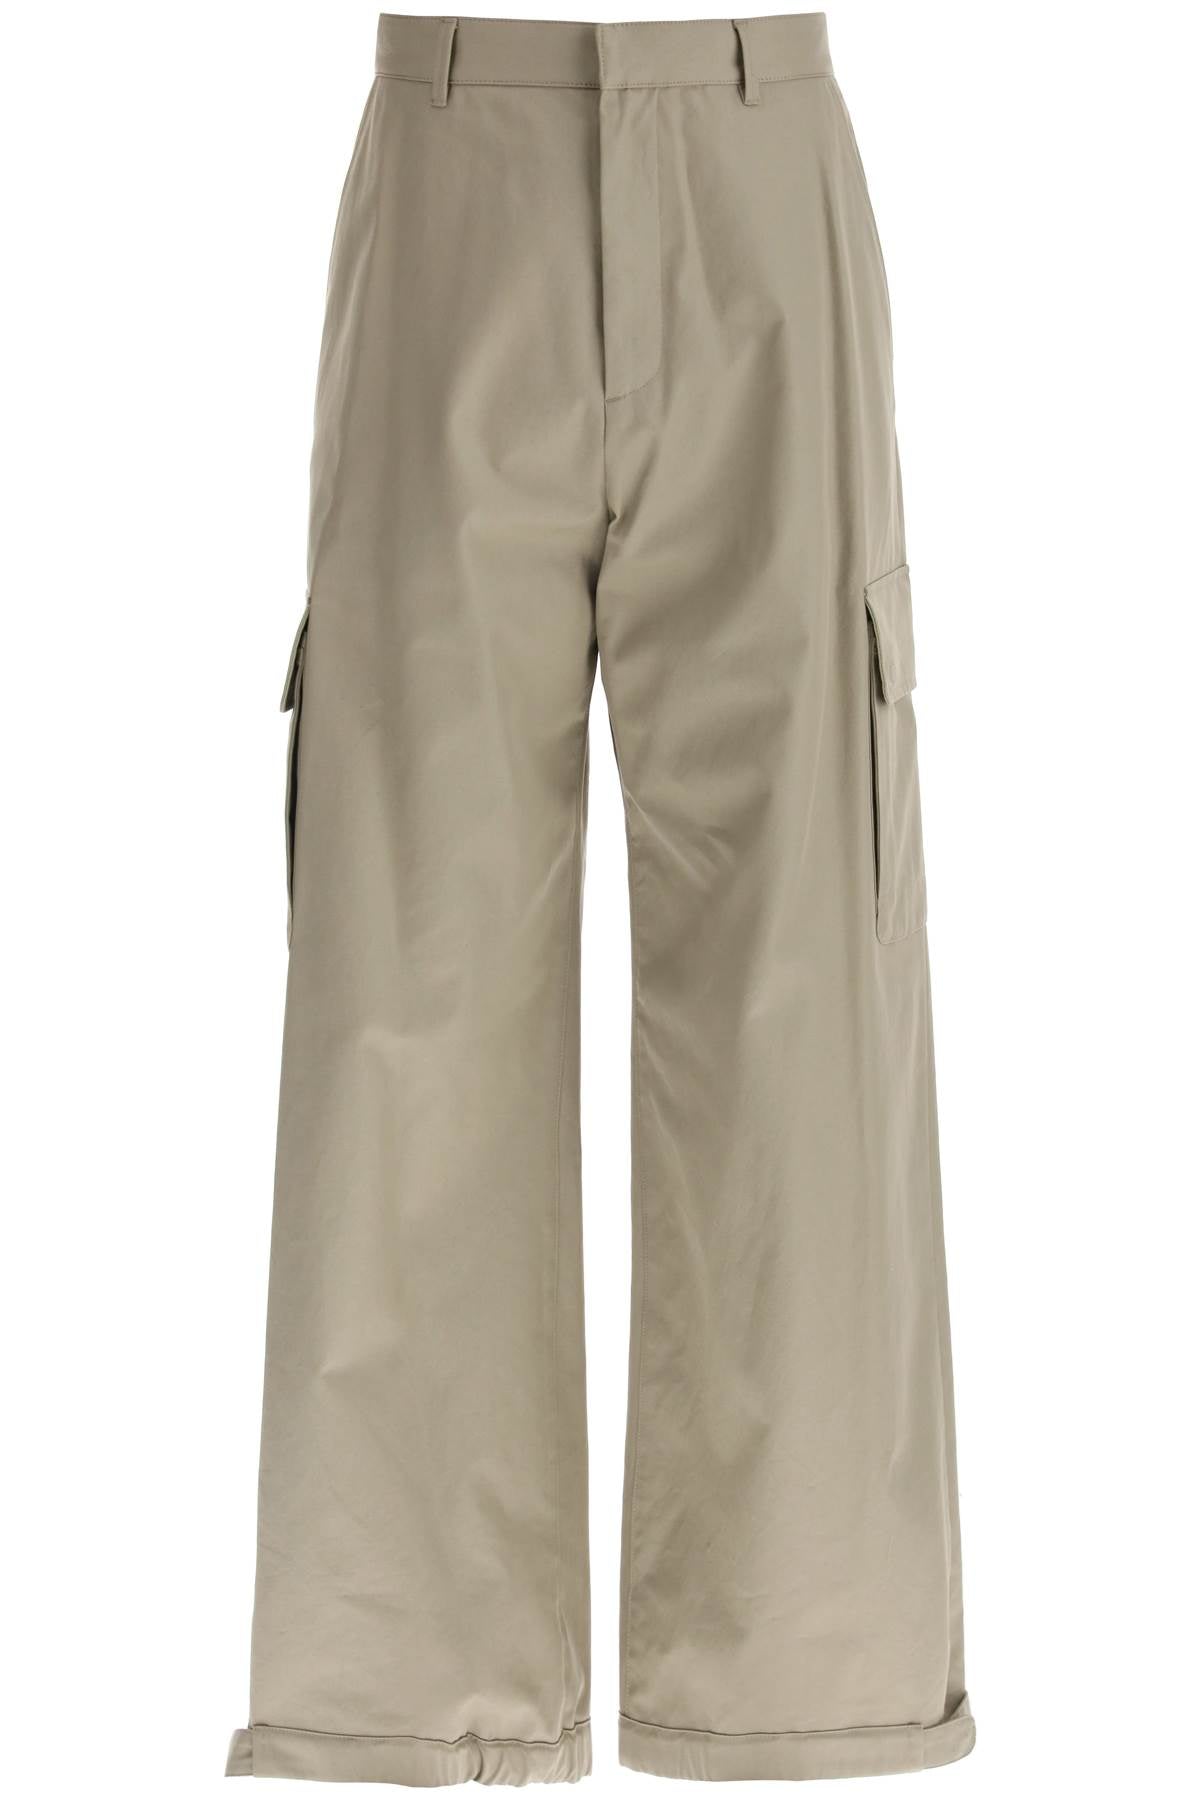 Off-white wide-legged cargo pants with ample leg-0